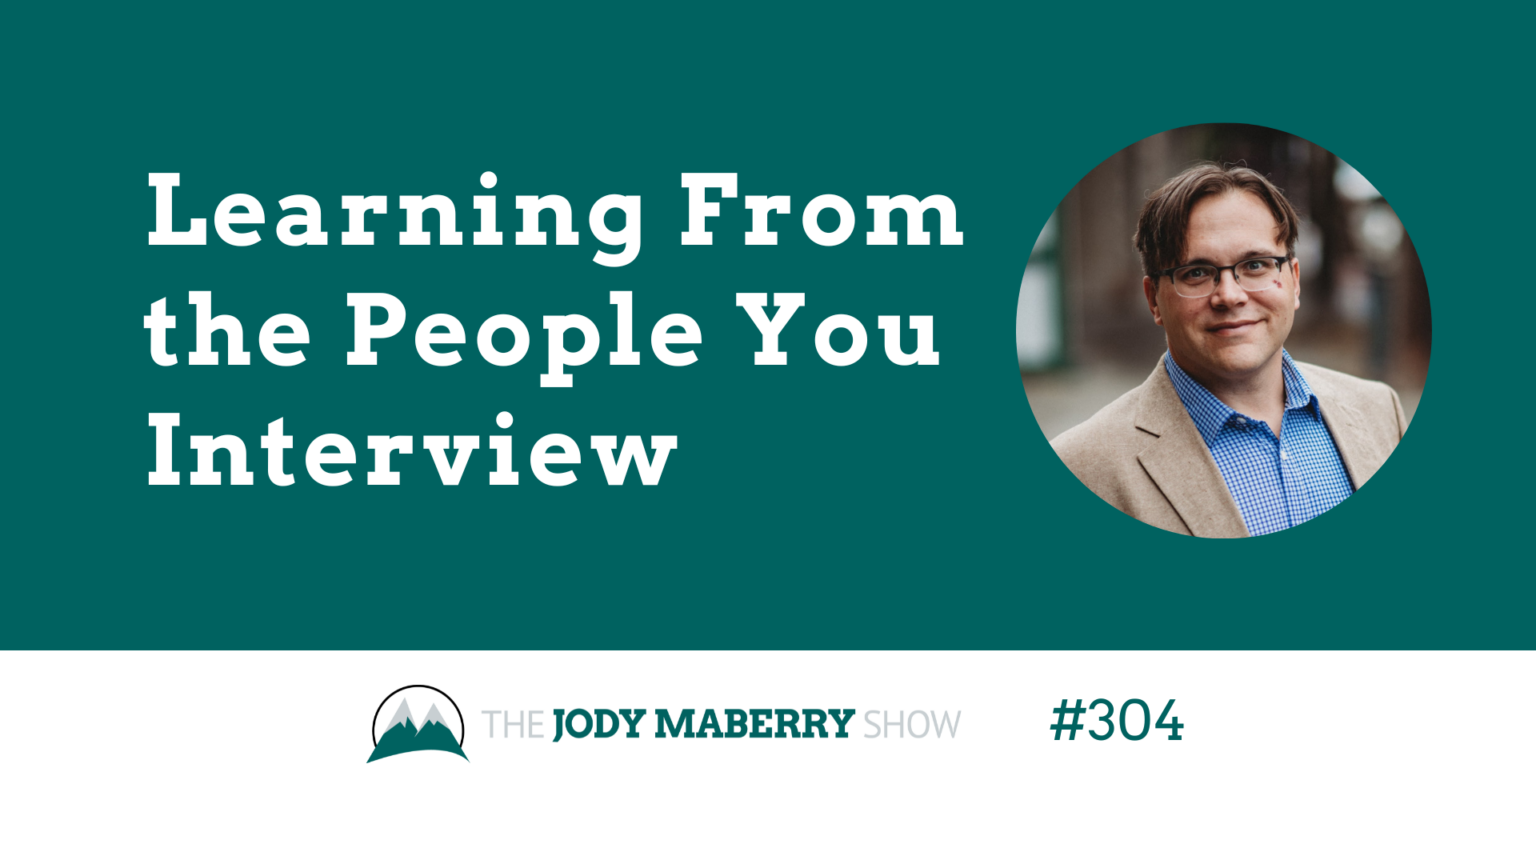 Jody Maberry Show Episode 304 Learning From the People You Interview